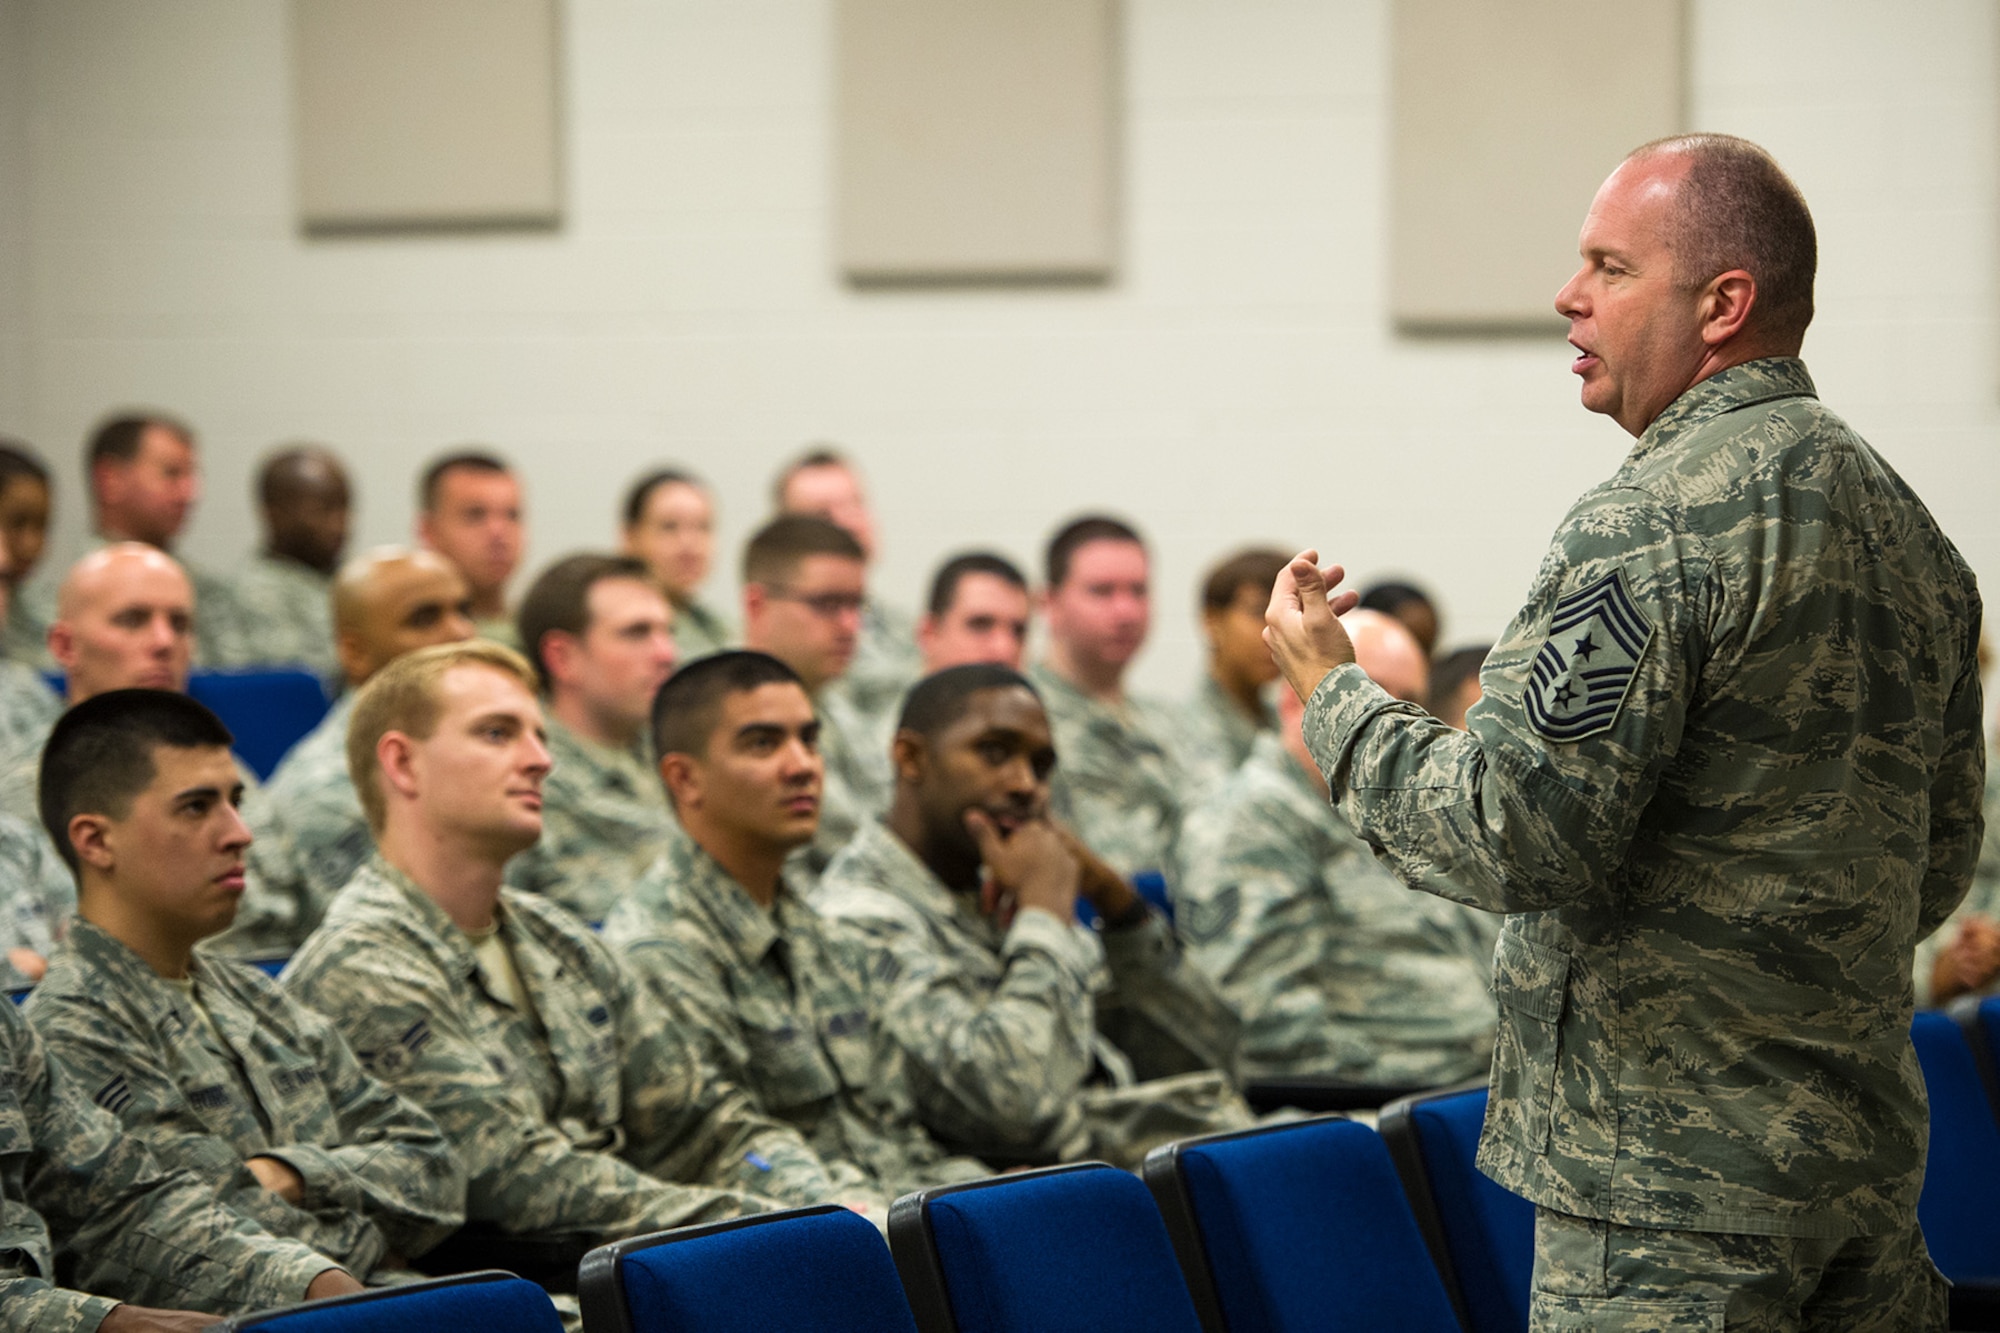 U.S. Air Force Chief Master Sgt. James W. Hotaling, Command Chief Master Sgt. for the Air National Guard, visited the South Carolina Air National Guard's 169th Fighter Wing at McEntire Joint National Guard Base, S.C., April 11, 2015. Hotaling hosted town hall meetings to engage Swamp Fox Airmen in the discussion of three key points; the profession of arms, the health of the force and recognizing and renewing commitments to Airmen.  (U.S. Air National Guard photo by Tech. Sgt. Jorge Intriago/RELEASED)